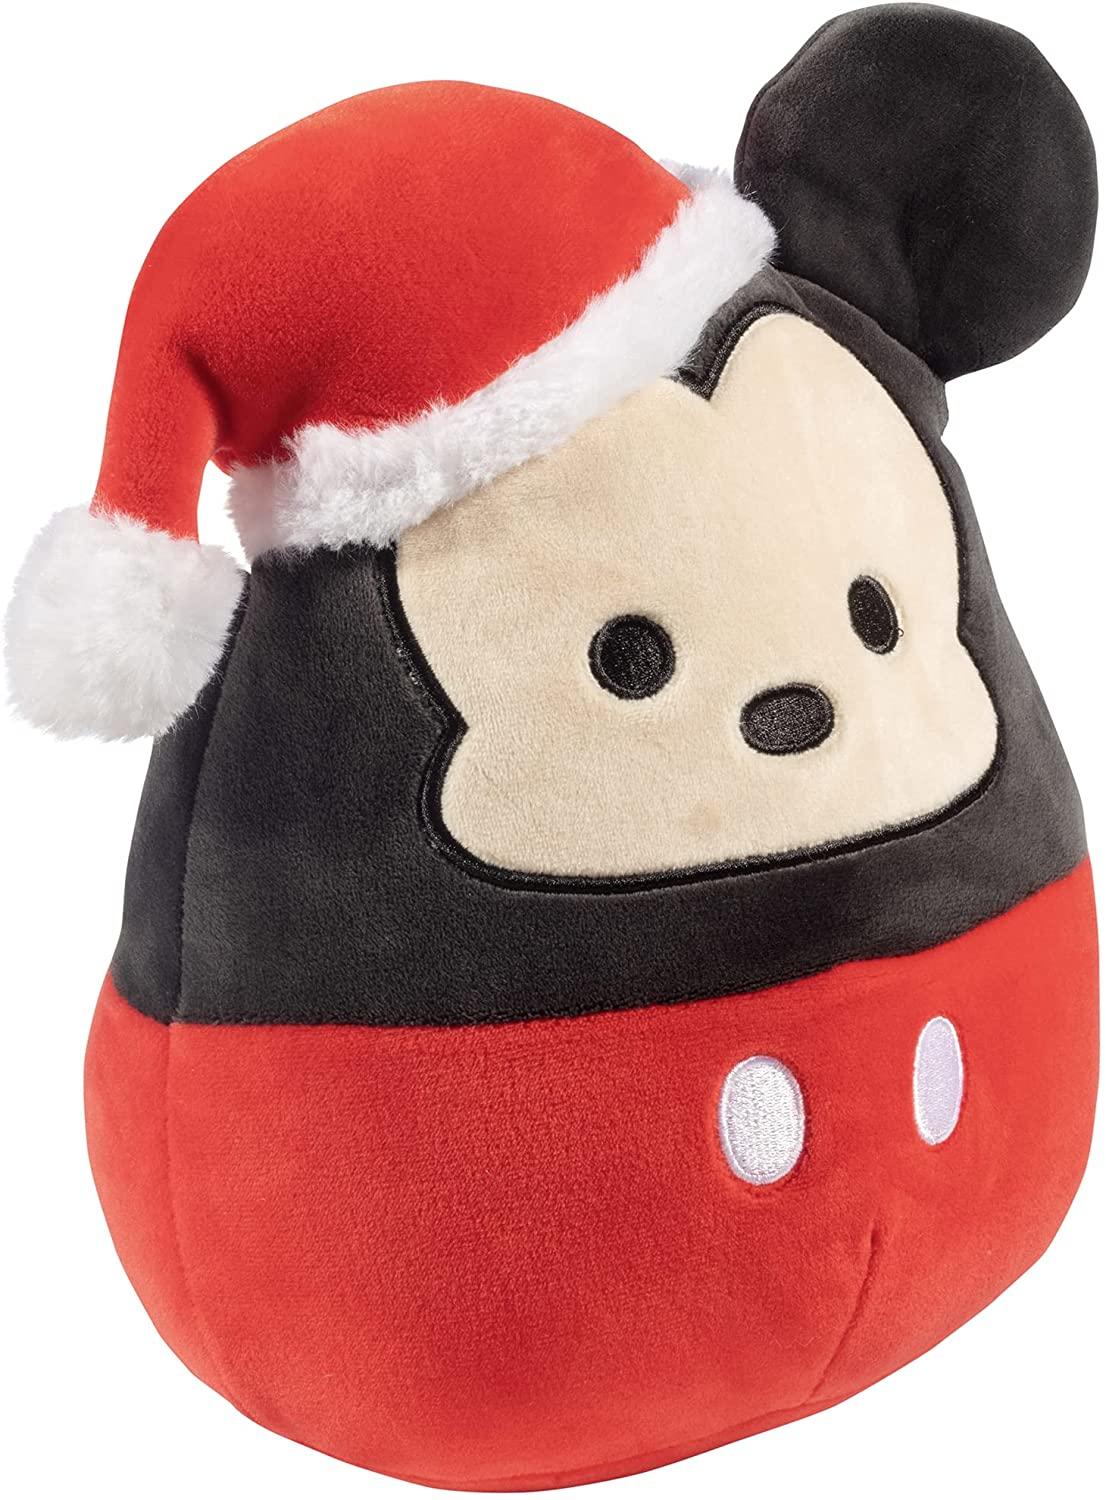 Squishmallows 8-inch Disney Mickey Mouse with Santa Hat 